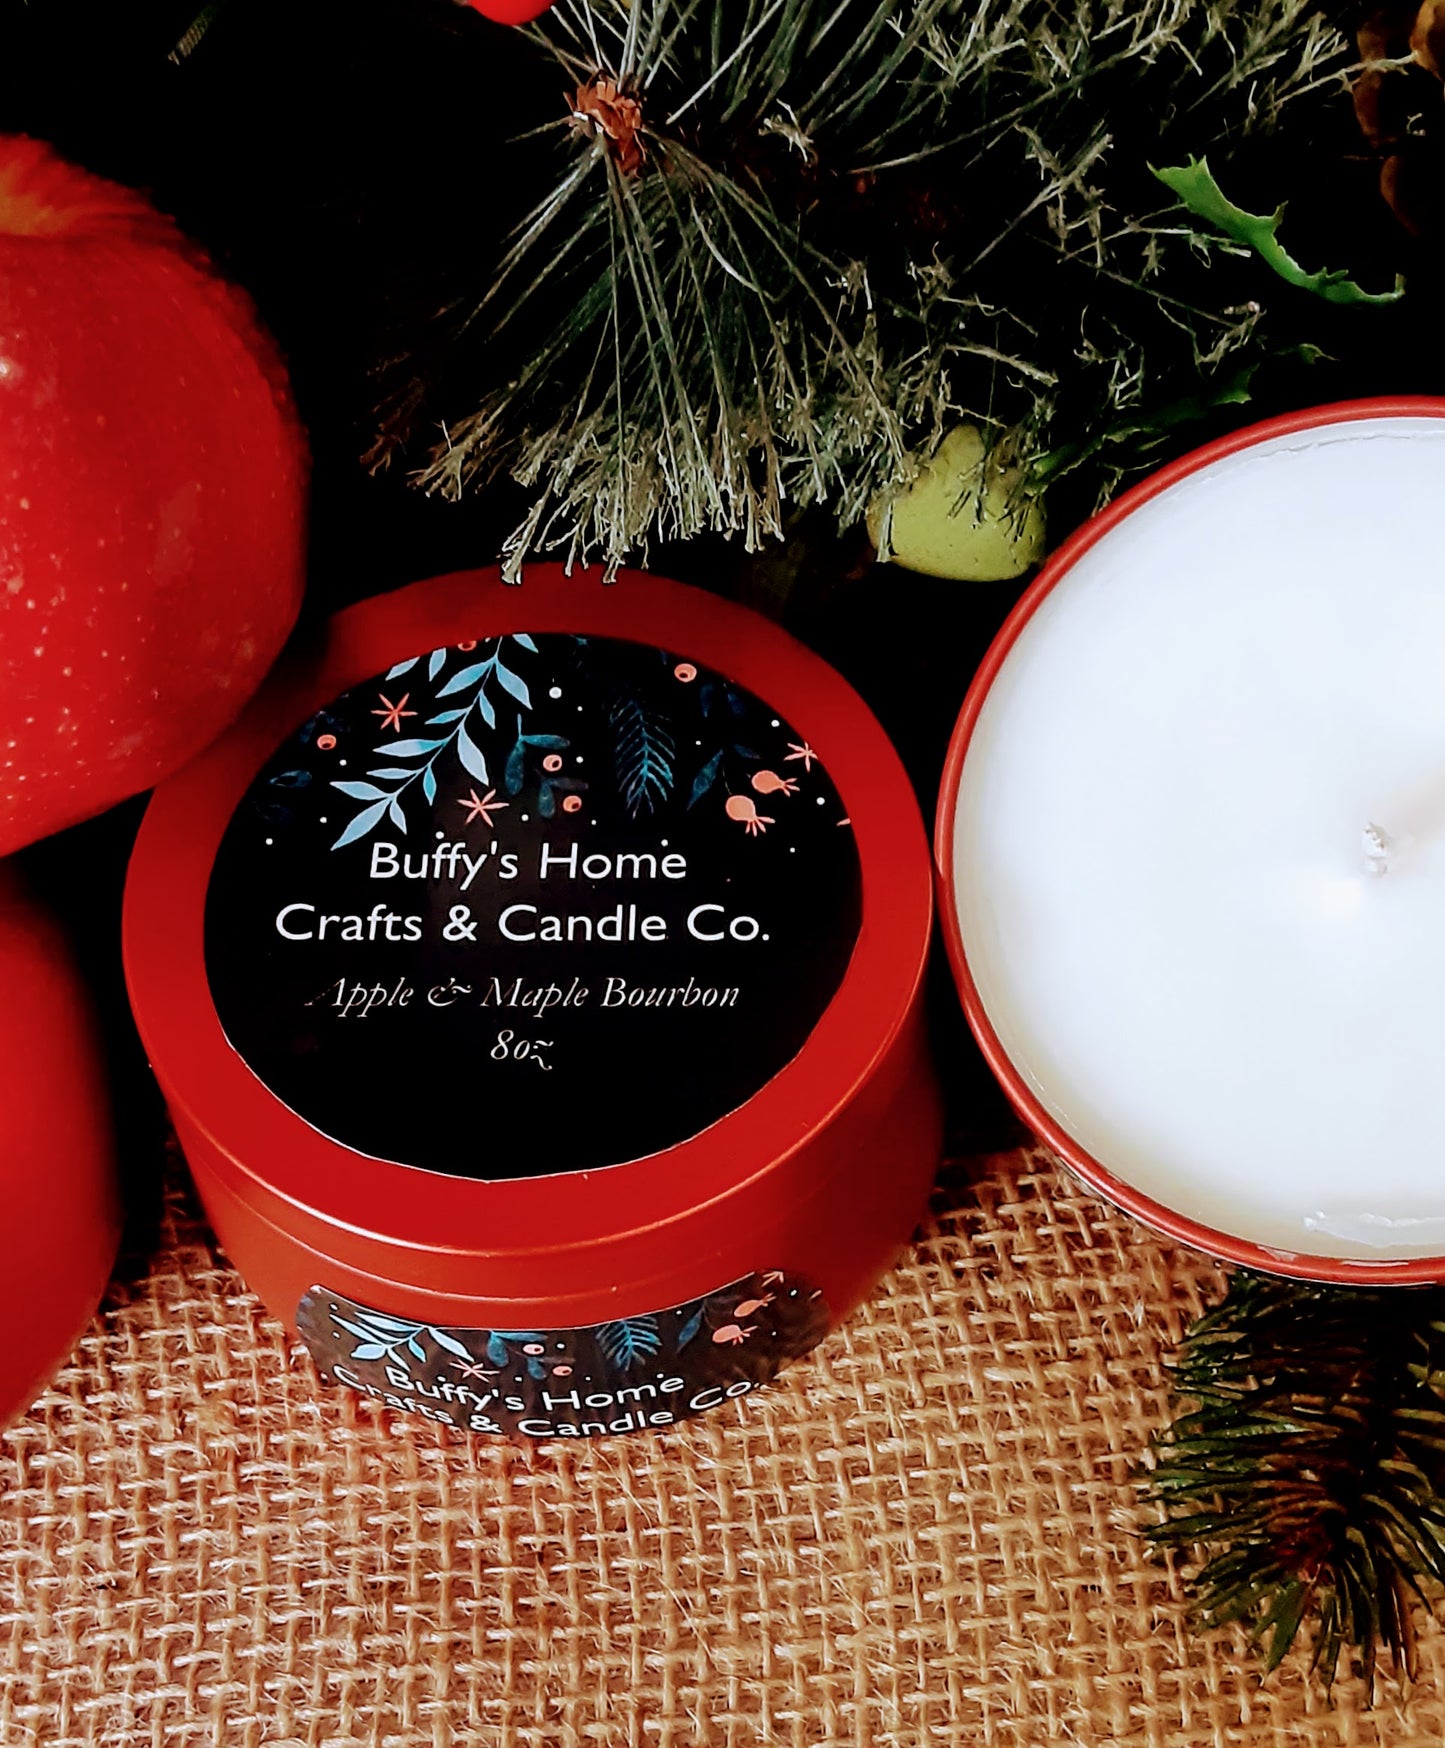 Get 3 Holiday Fragrance Candles for $25.00 (8oz multi-colored tins)